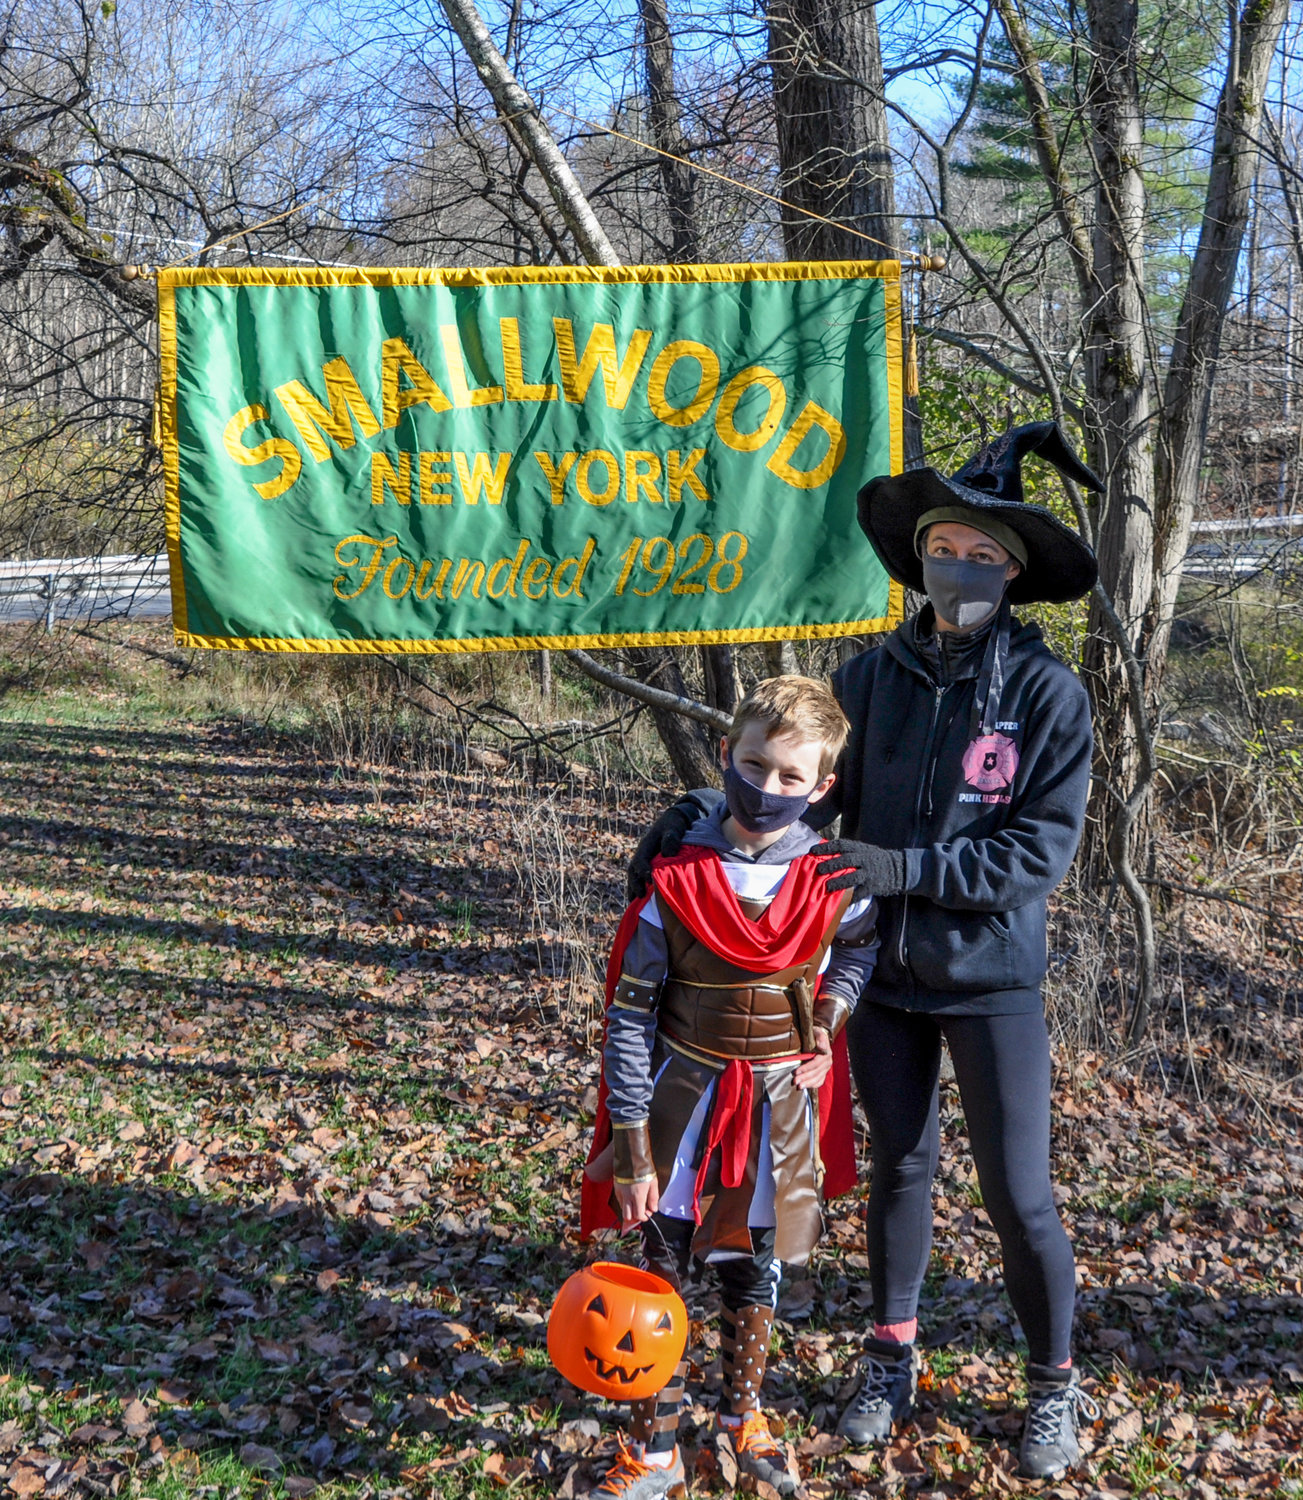 Gladiators, some Spidermen and a few witches were portrayed by kids enjoying the COVID-safe Halloween walk around Smallwood Lake last weekend.